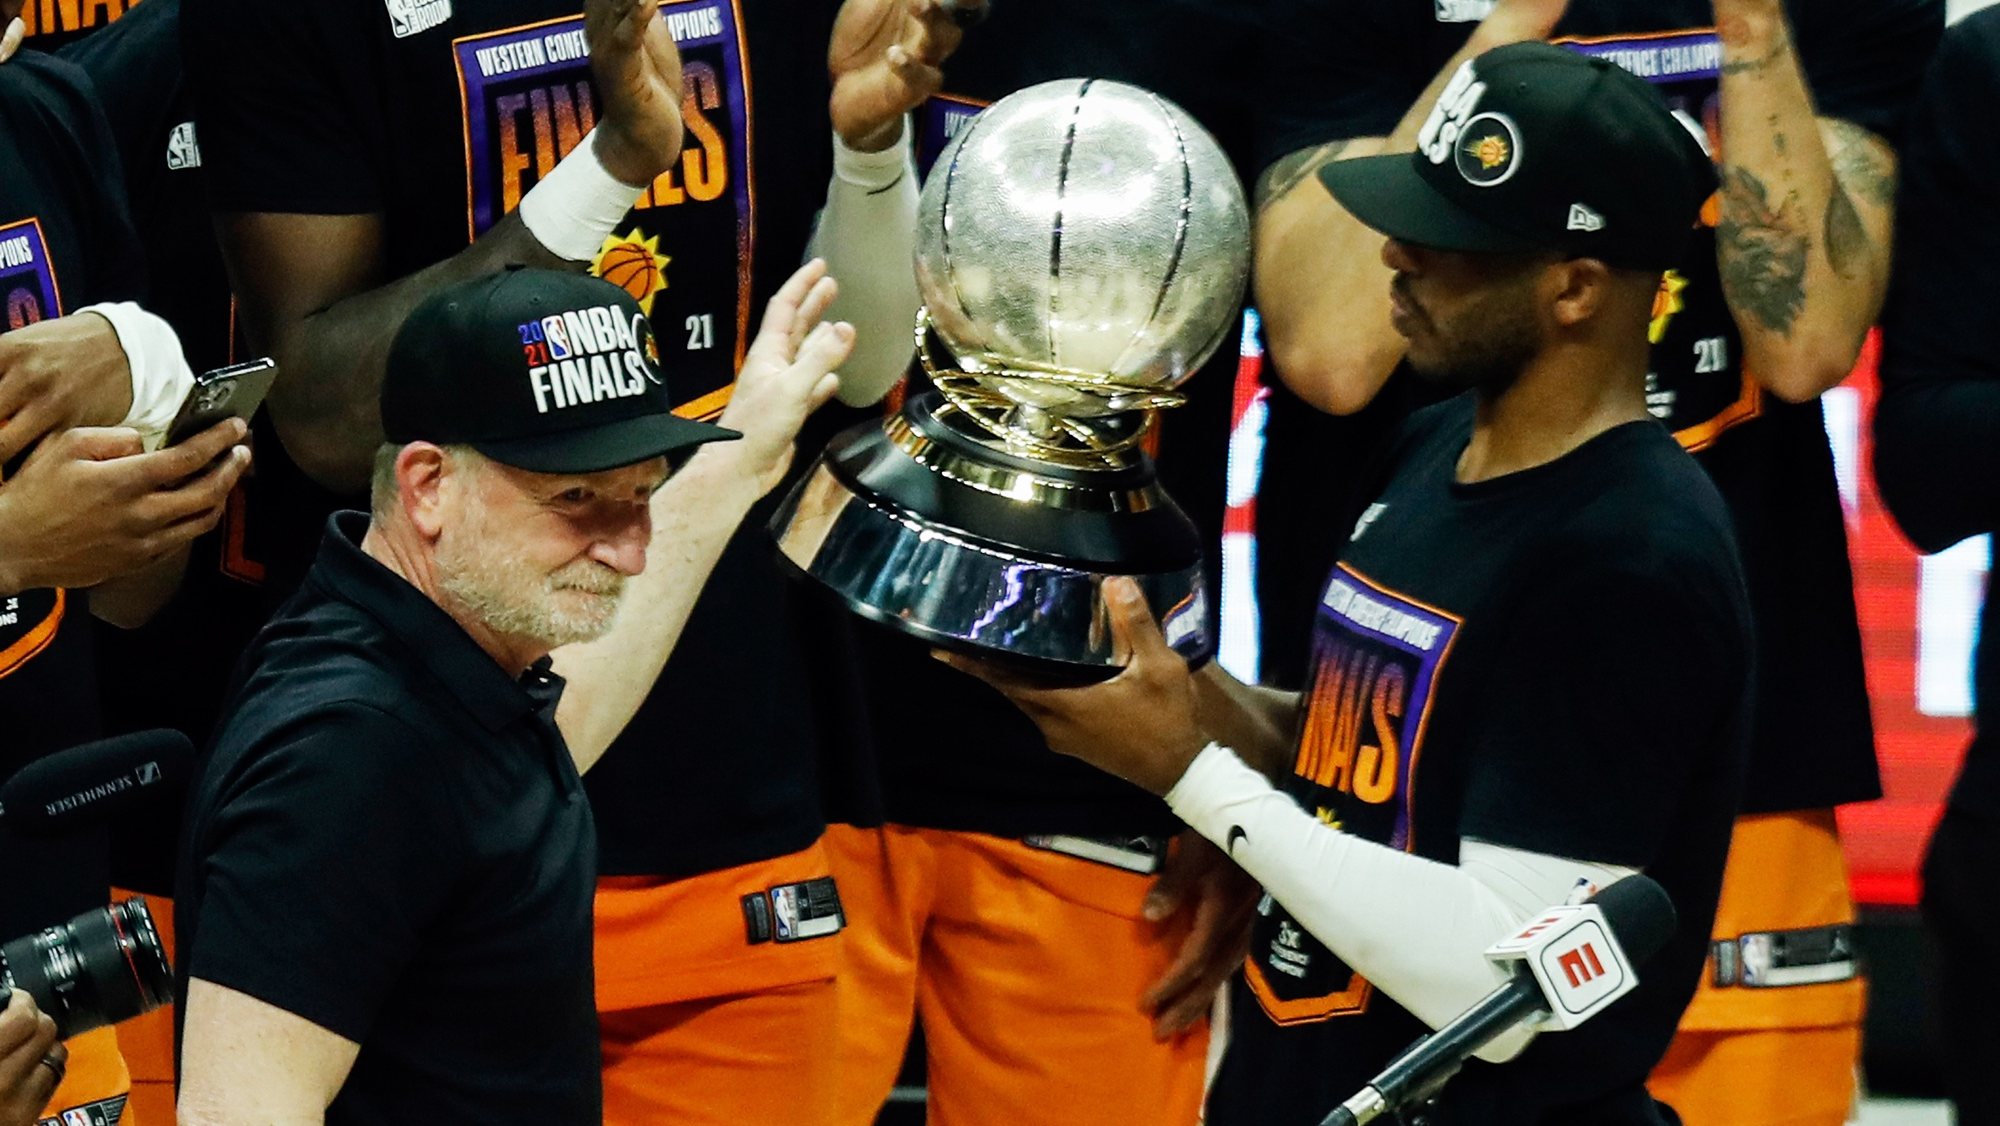 epa09314732 Phoenix Suns owner Robert Sarver (L) gives the Western Conference Trophy to Phoenix Suns guard Chris Paul (R) to lift  next to his teammates after winning game 6 of the NBA playoffs Western Conference final between the Phoenix Suns and the Los Angeles Clippers at the Staples Center in Los Angeles, California, USA, 30 June 2021.  EPA/ETIENNE LAURENT SHUTTERSTOCK OUT